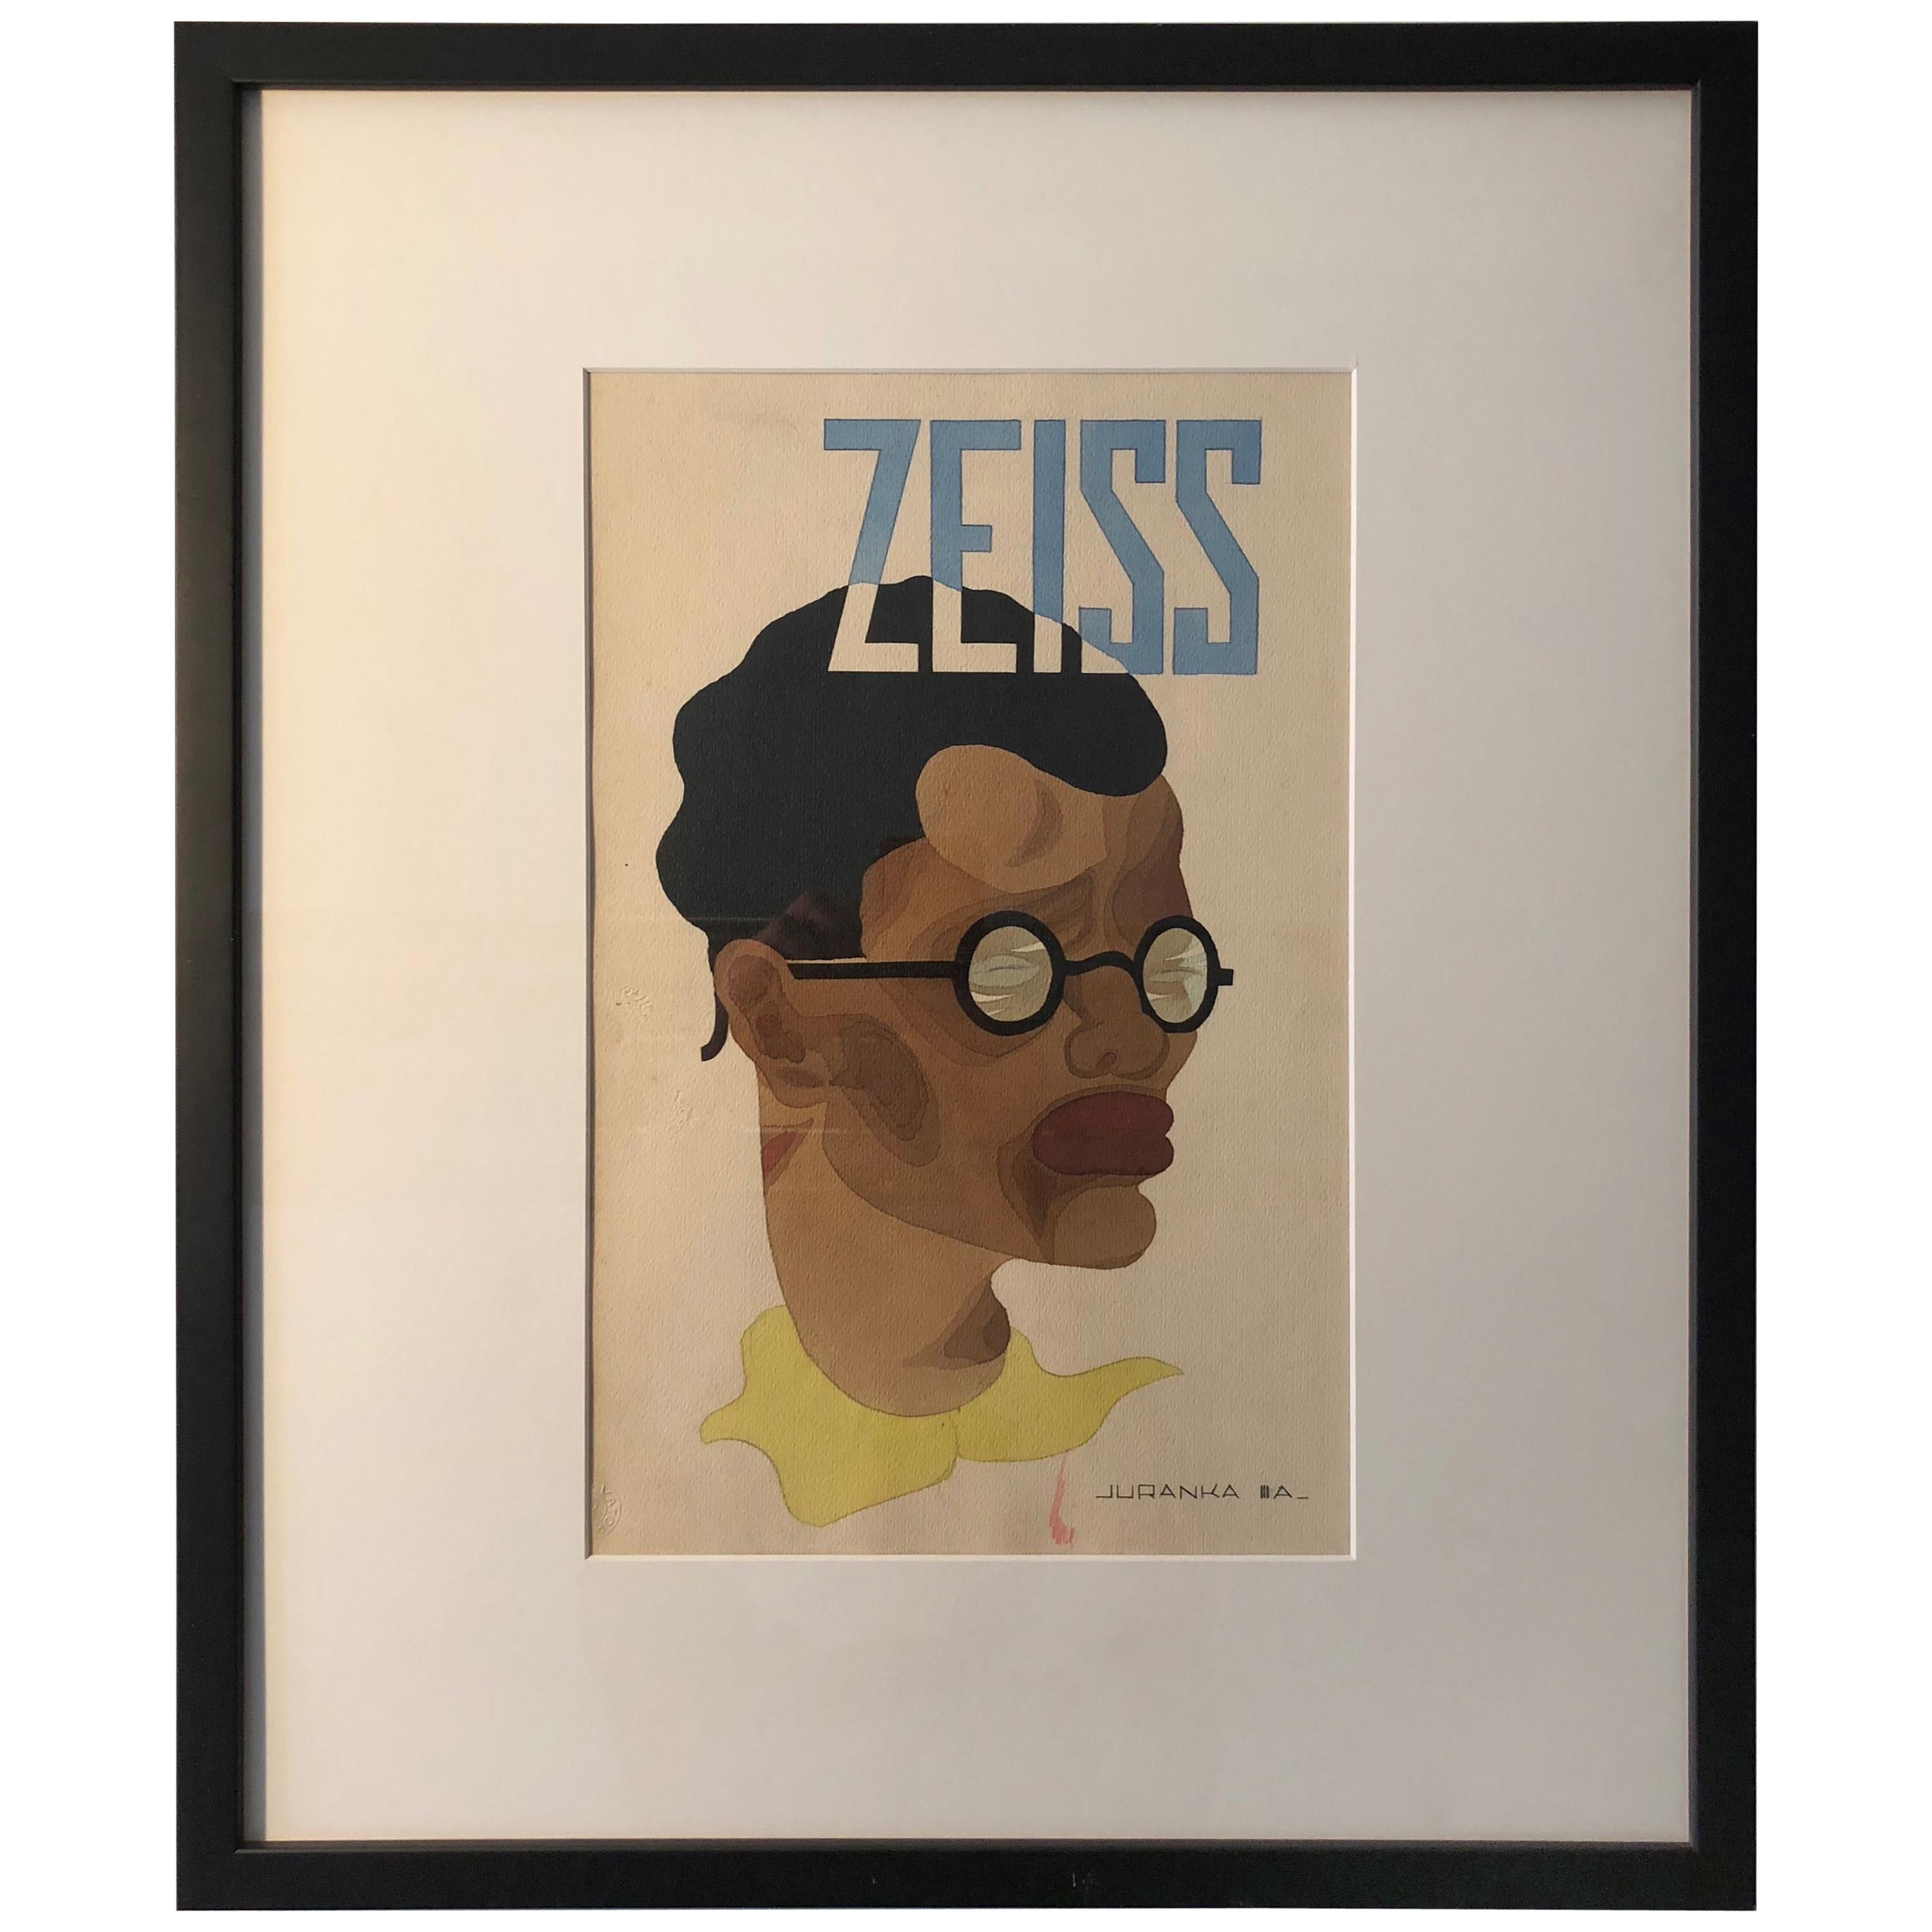 Watercolour, Advertising Study for Zeiss from 1920s